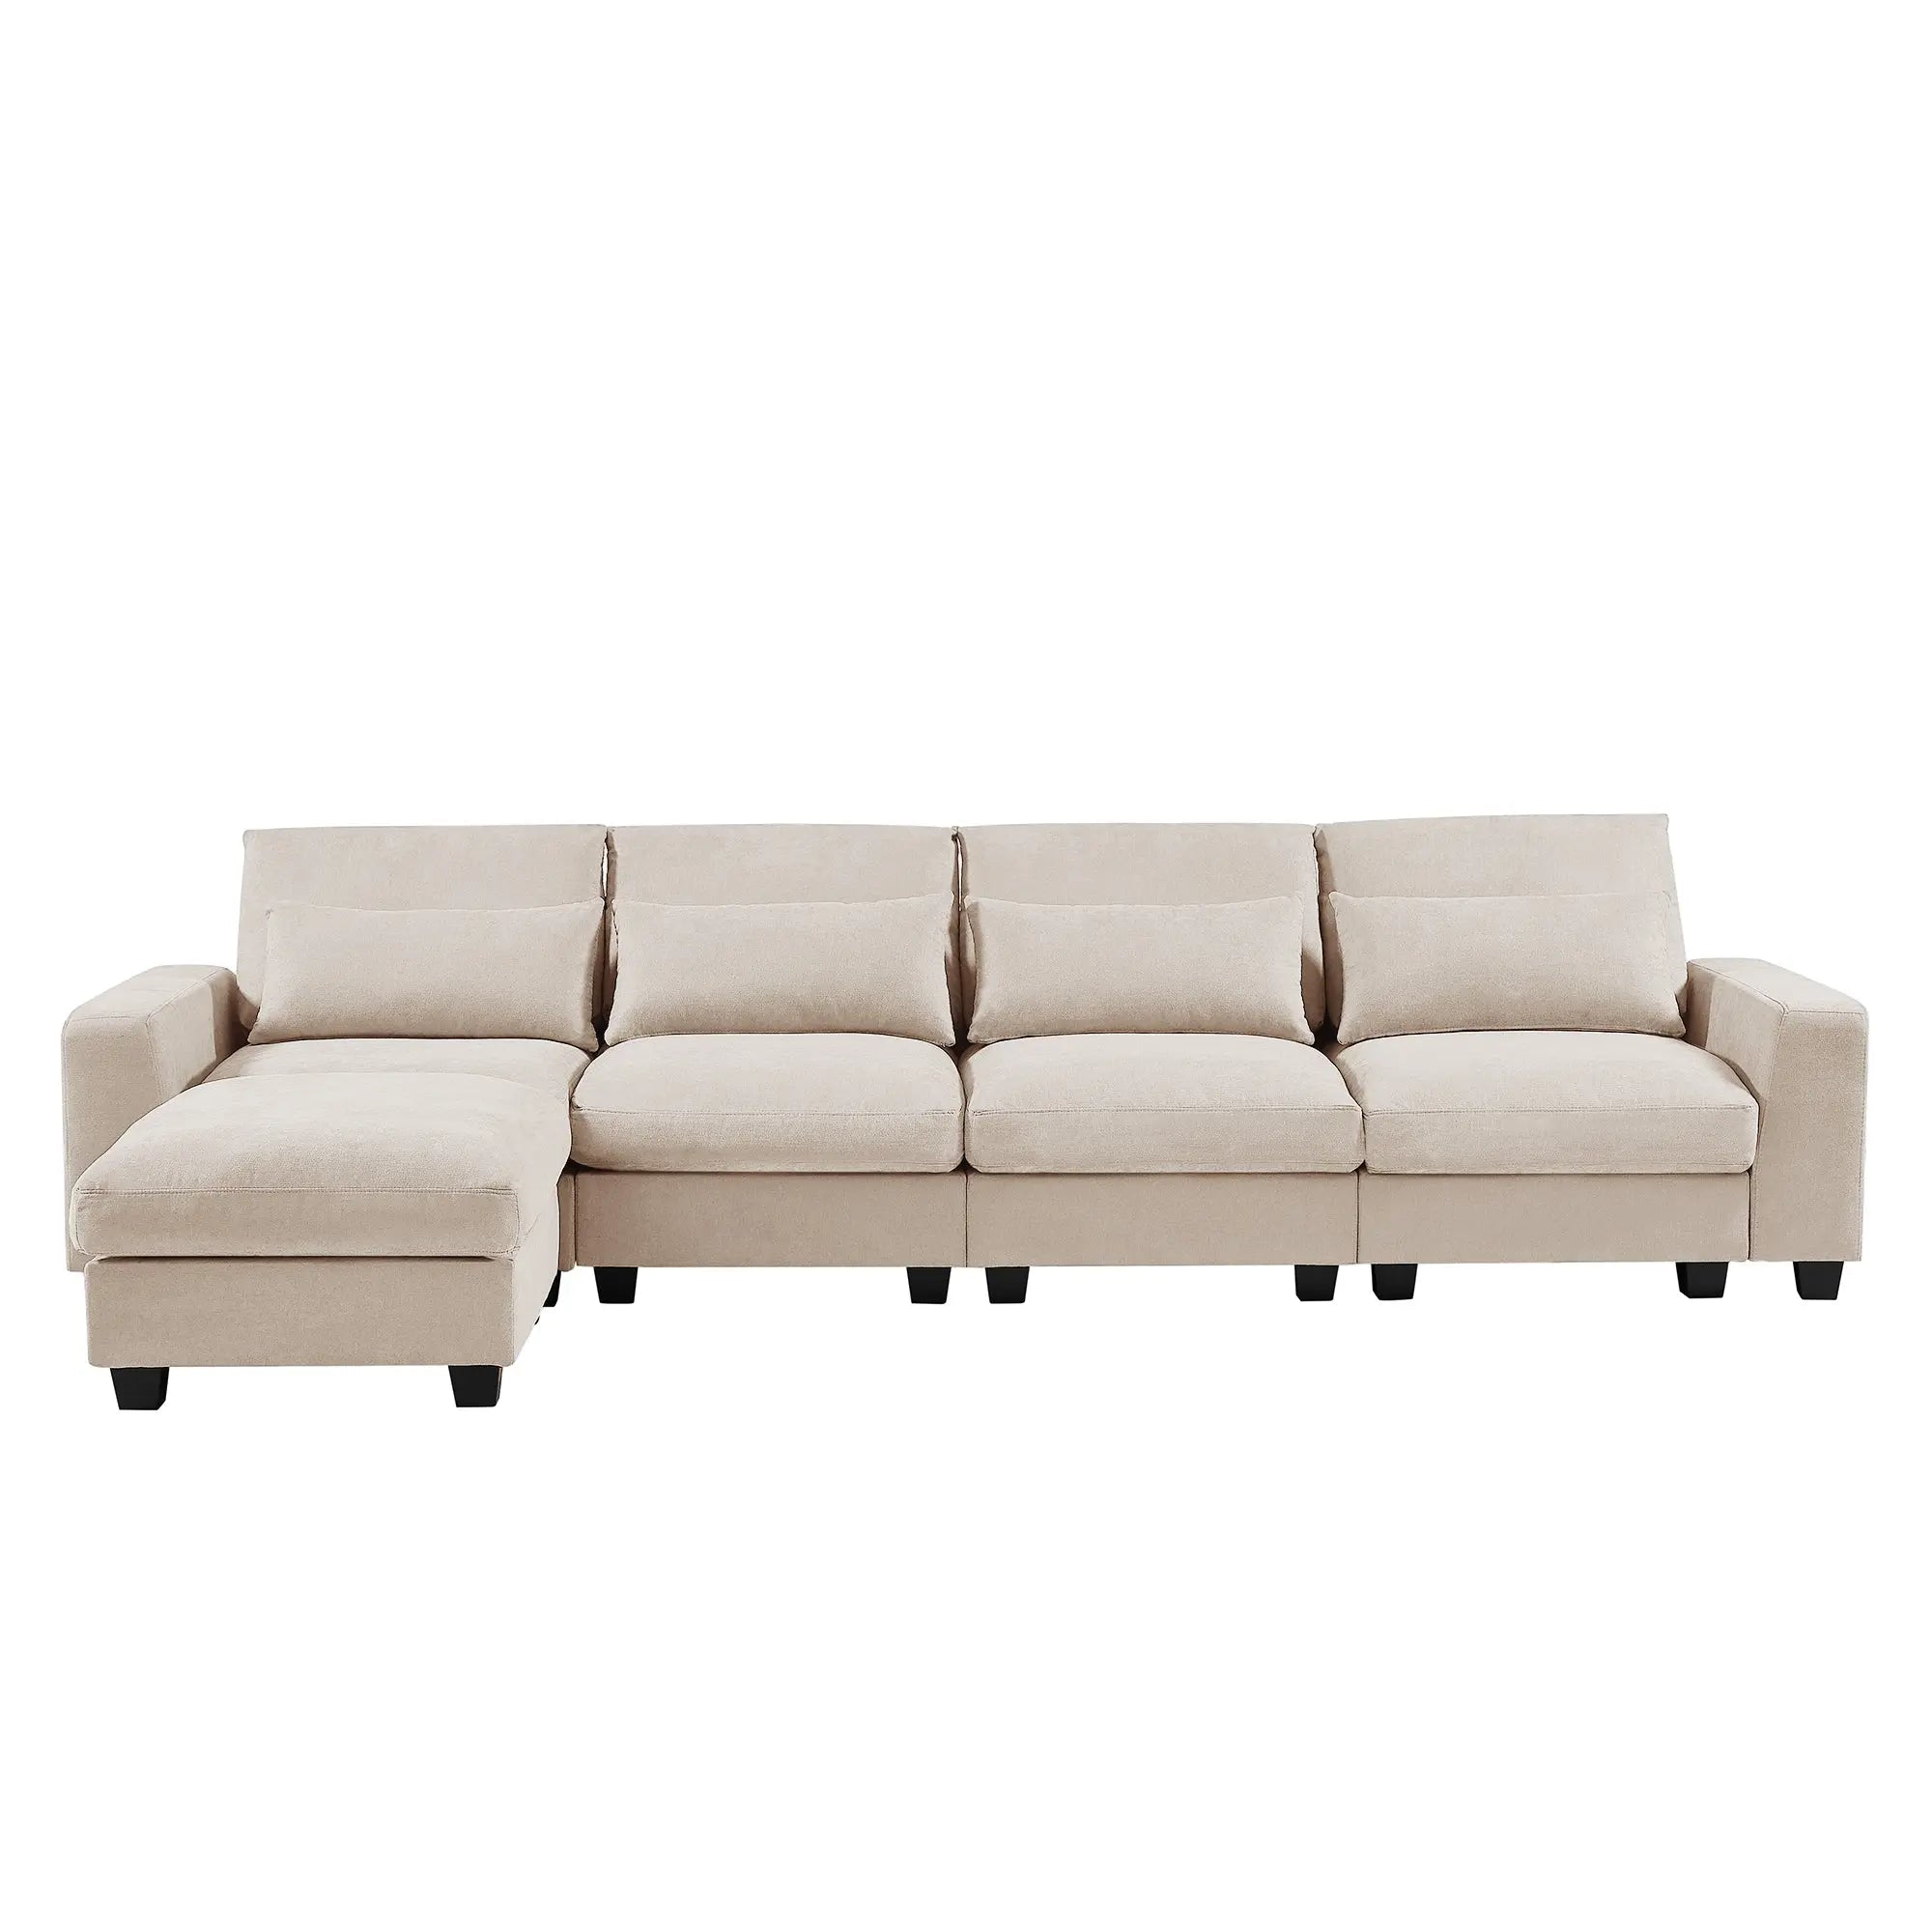 Bellemave 129.9" Modern Large L-Shape Feather Filled Sectional Sofa, Convertible Sofa Couch with Reversible Chaise Bellemave